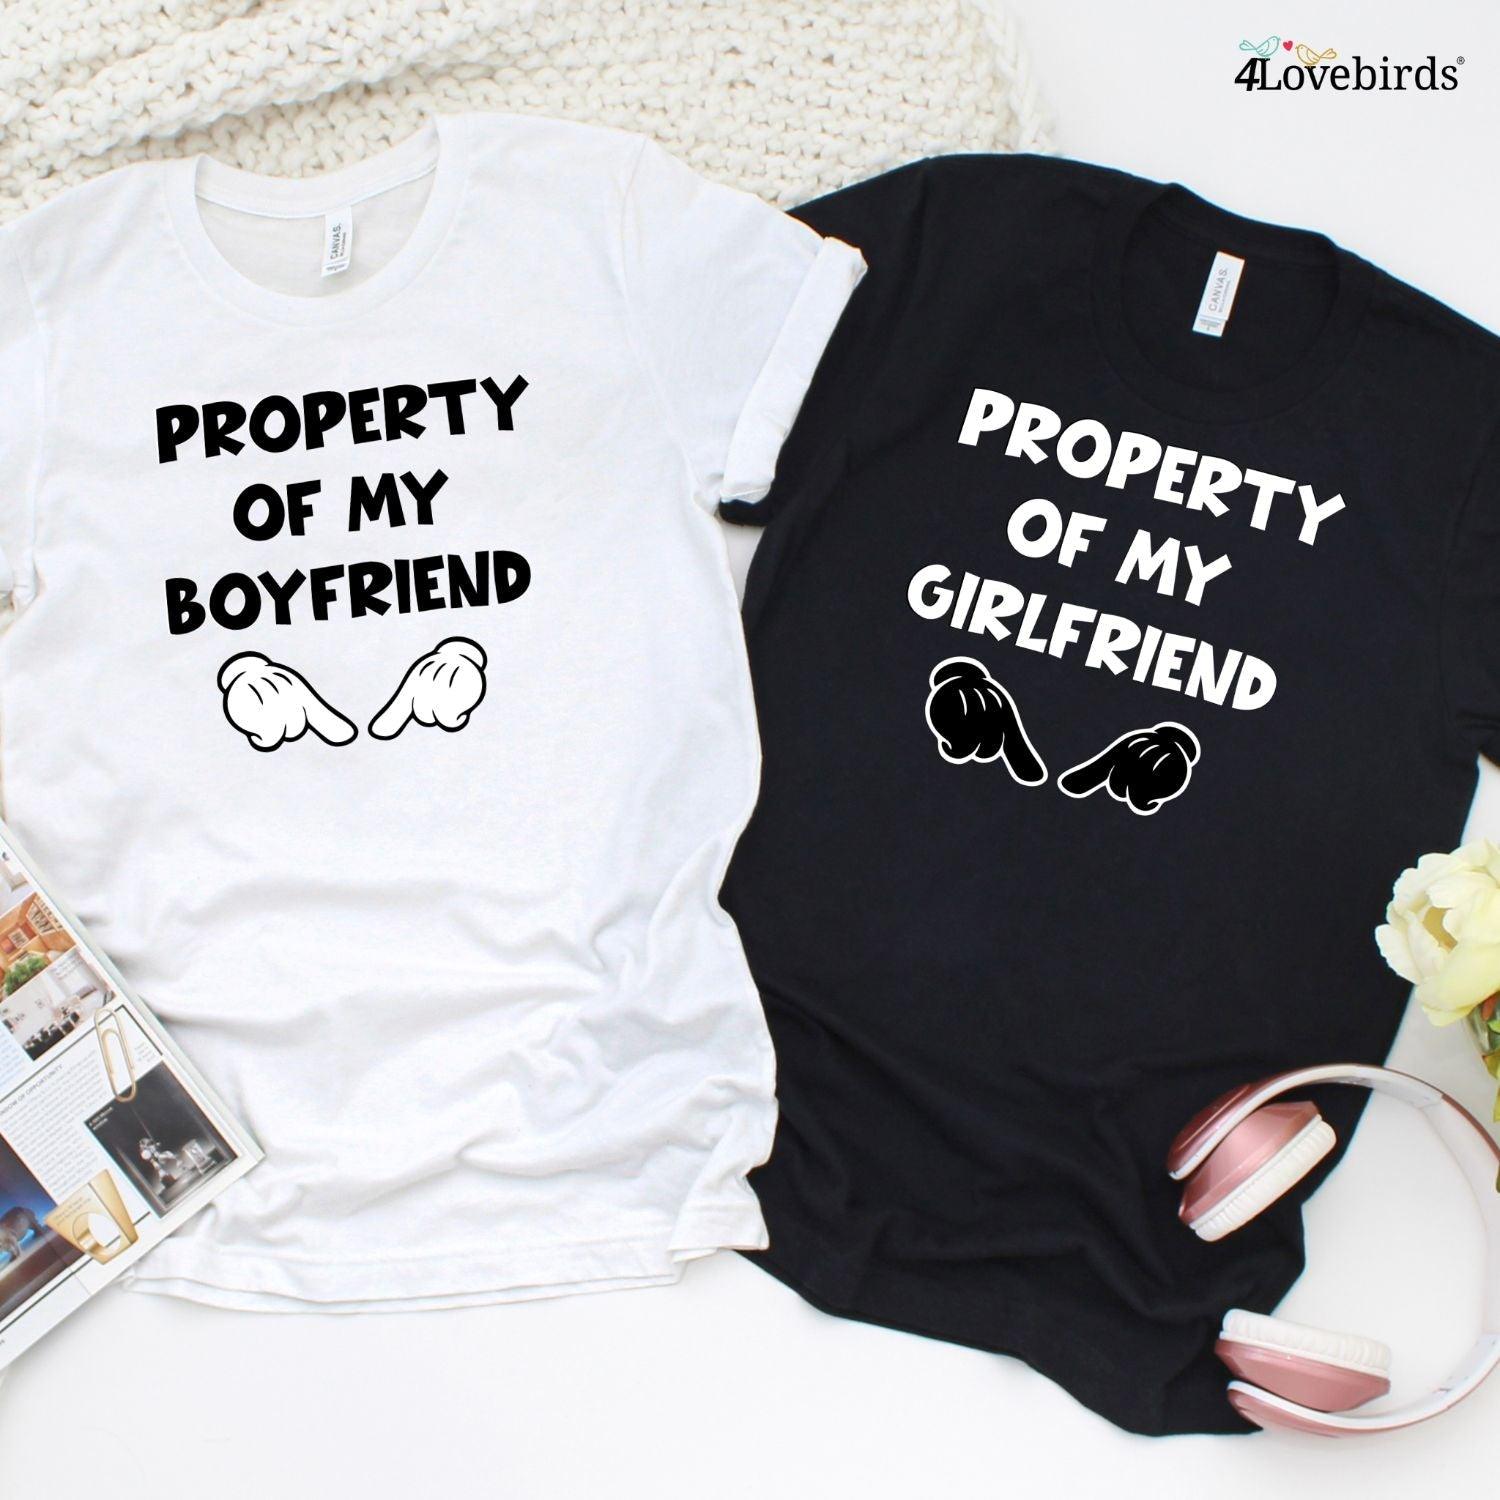 Funny Couple Matching Sets: Property Of My Boyfriend/Girlfriend Outfits - 4Lovebirds